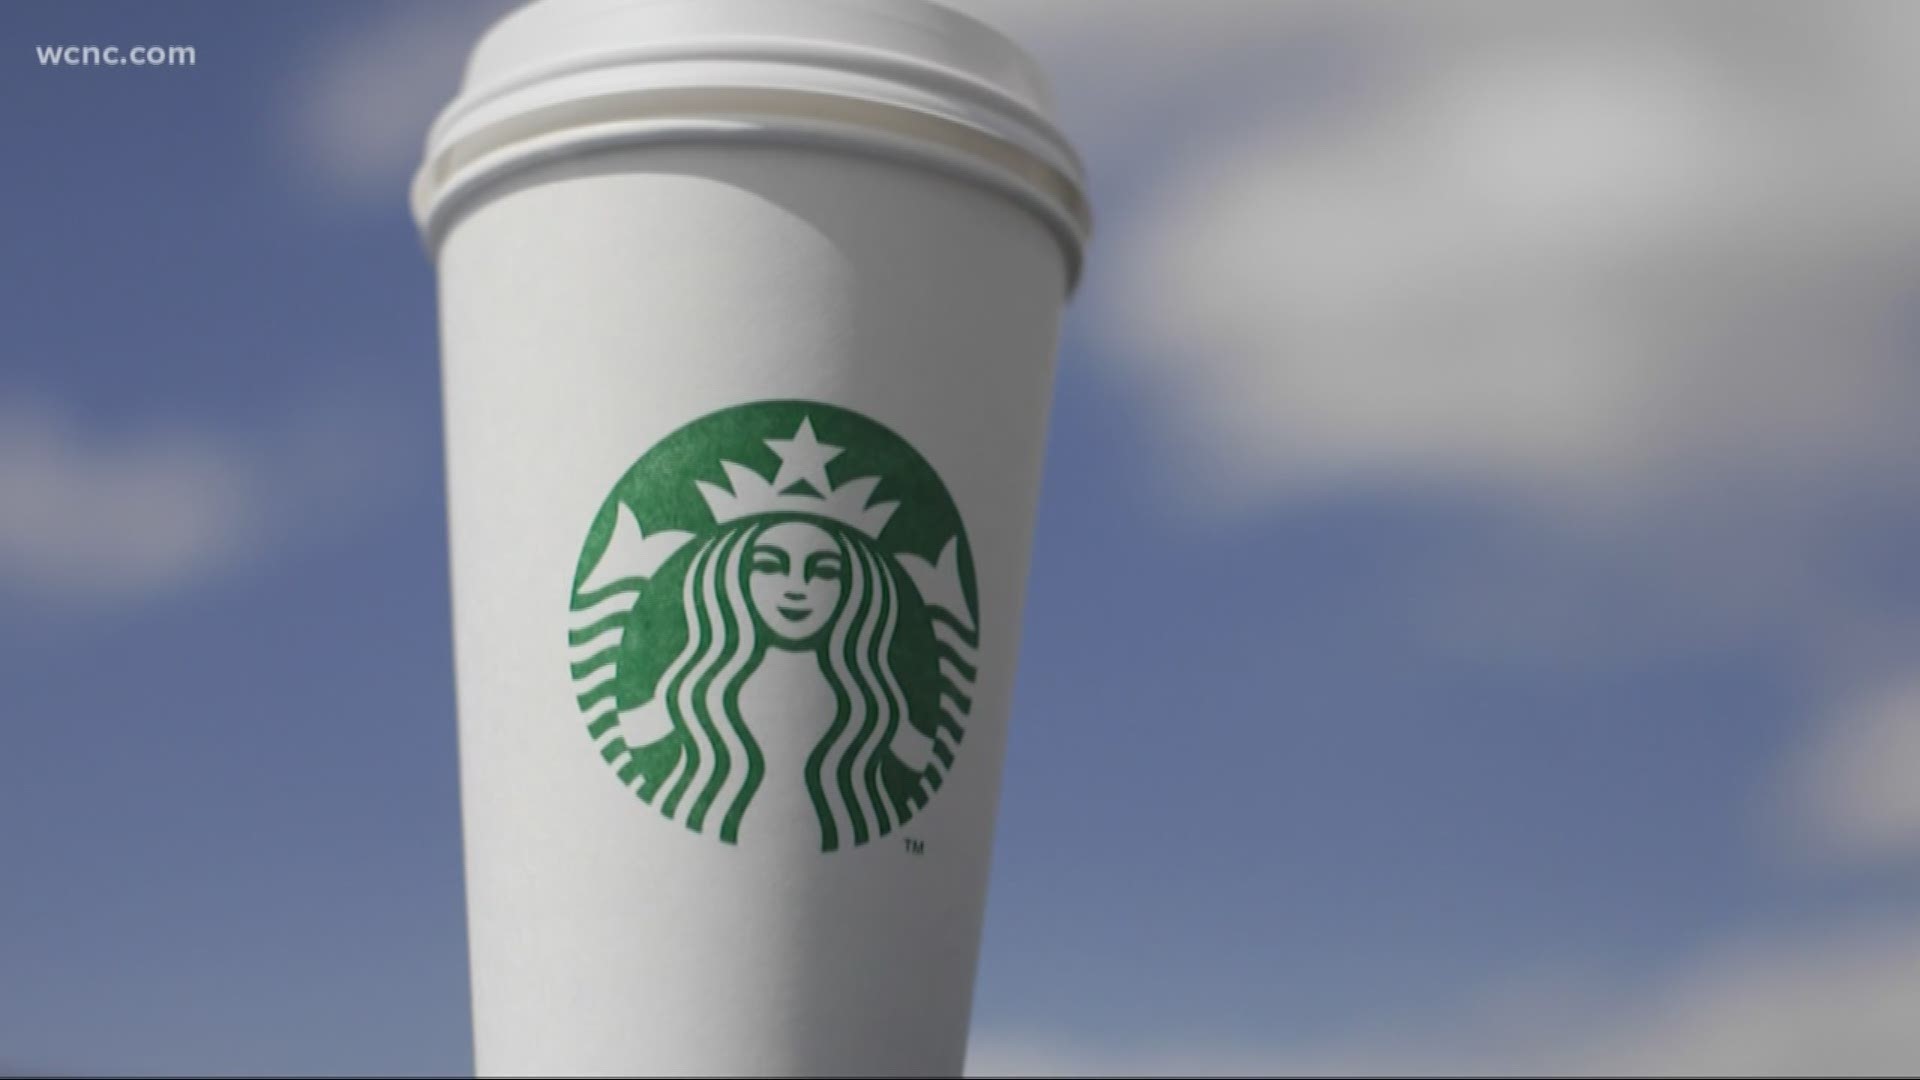 Animal rights group PETA is asking Starbucks to stop charging customers extra for vegan milk. PETA launched a petition, saying Starbucks should be encouraging their customers to choose a non-dairy option.